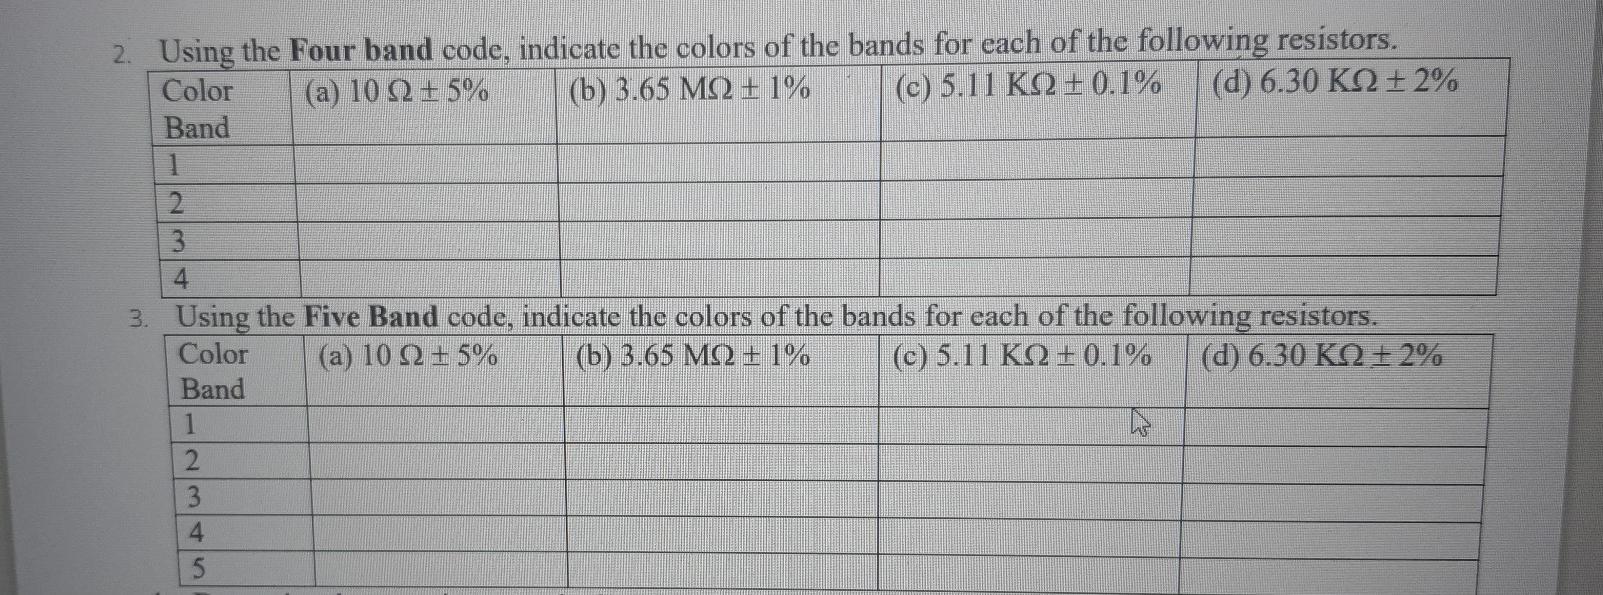 4-Band Code 2%, 5%, 10% 4k 72 5% Color 1' Rand und